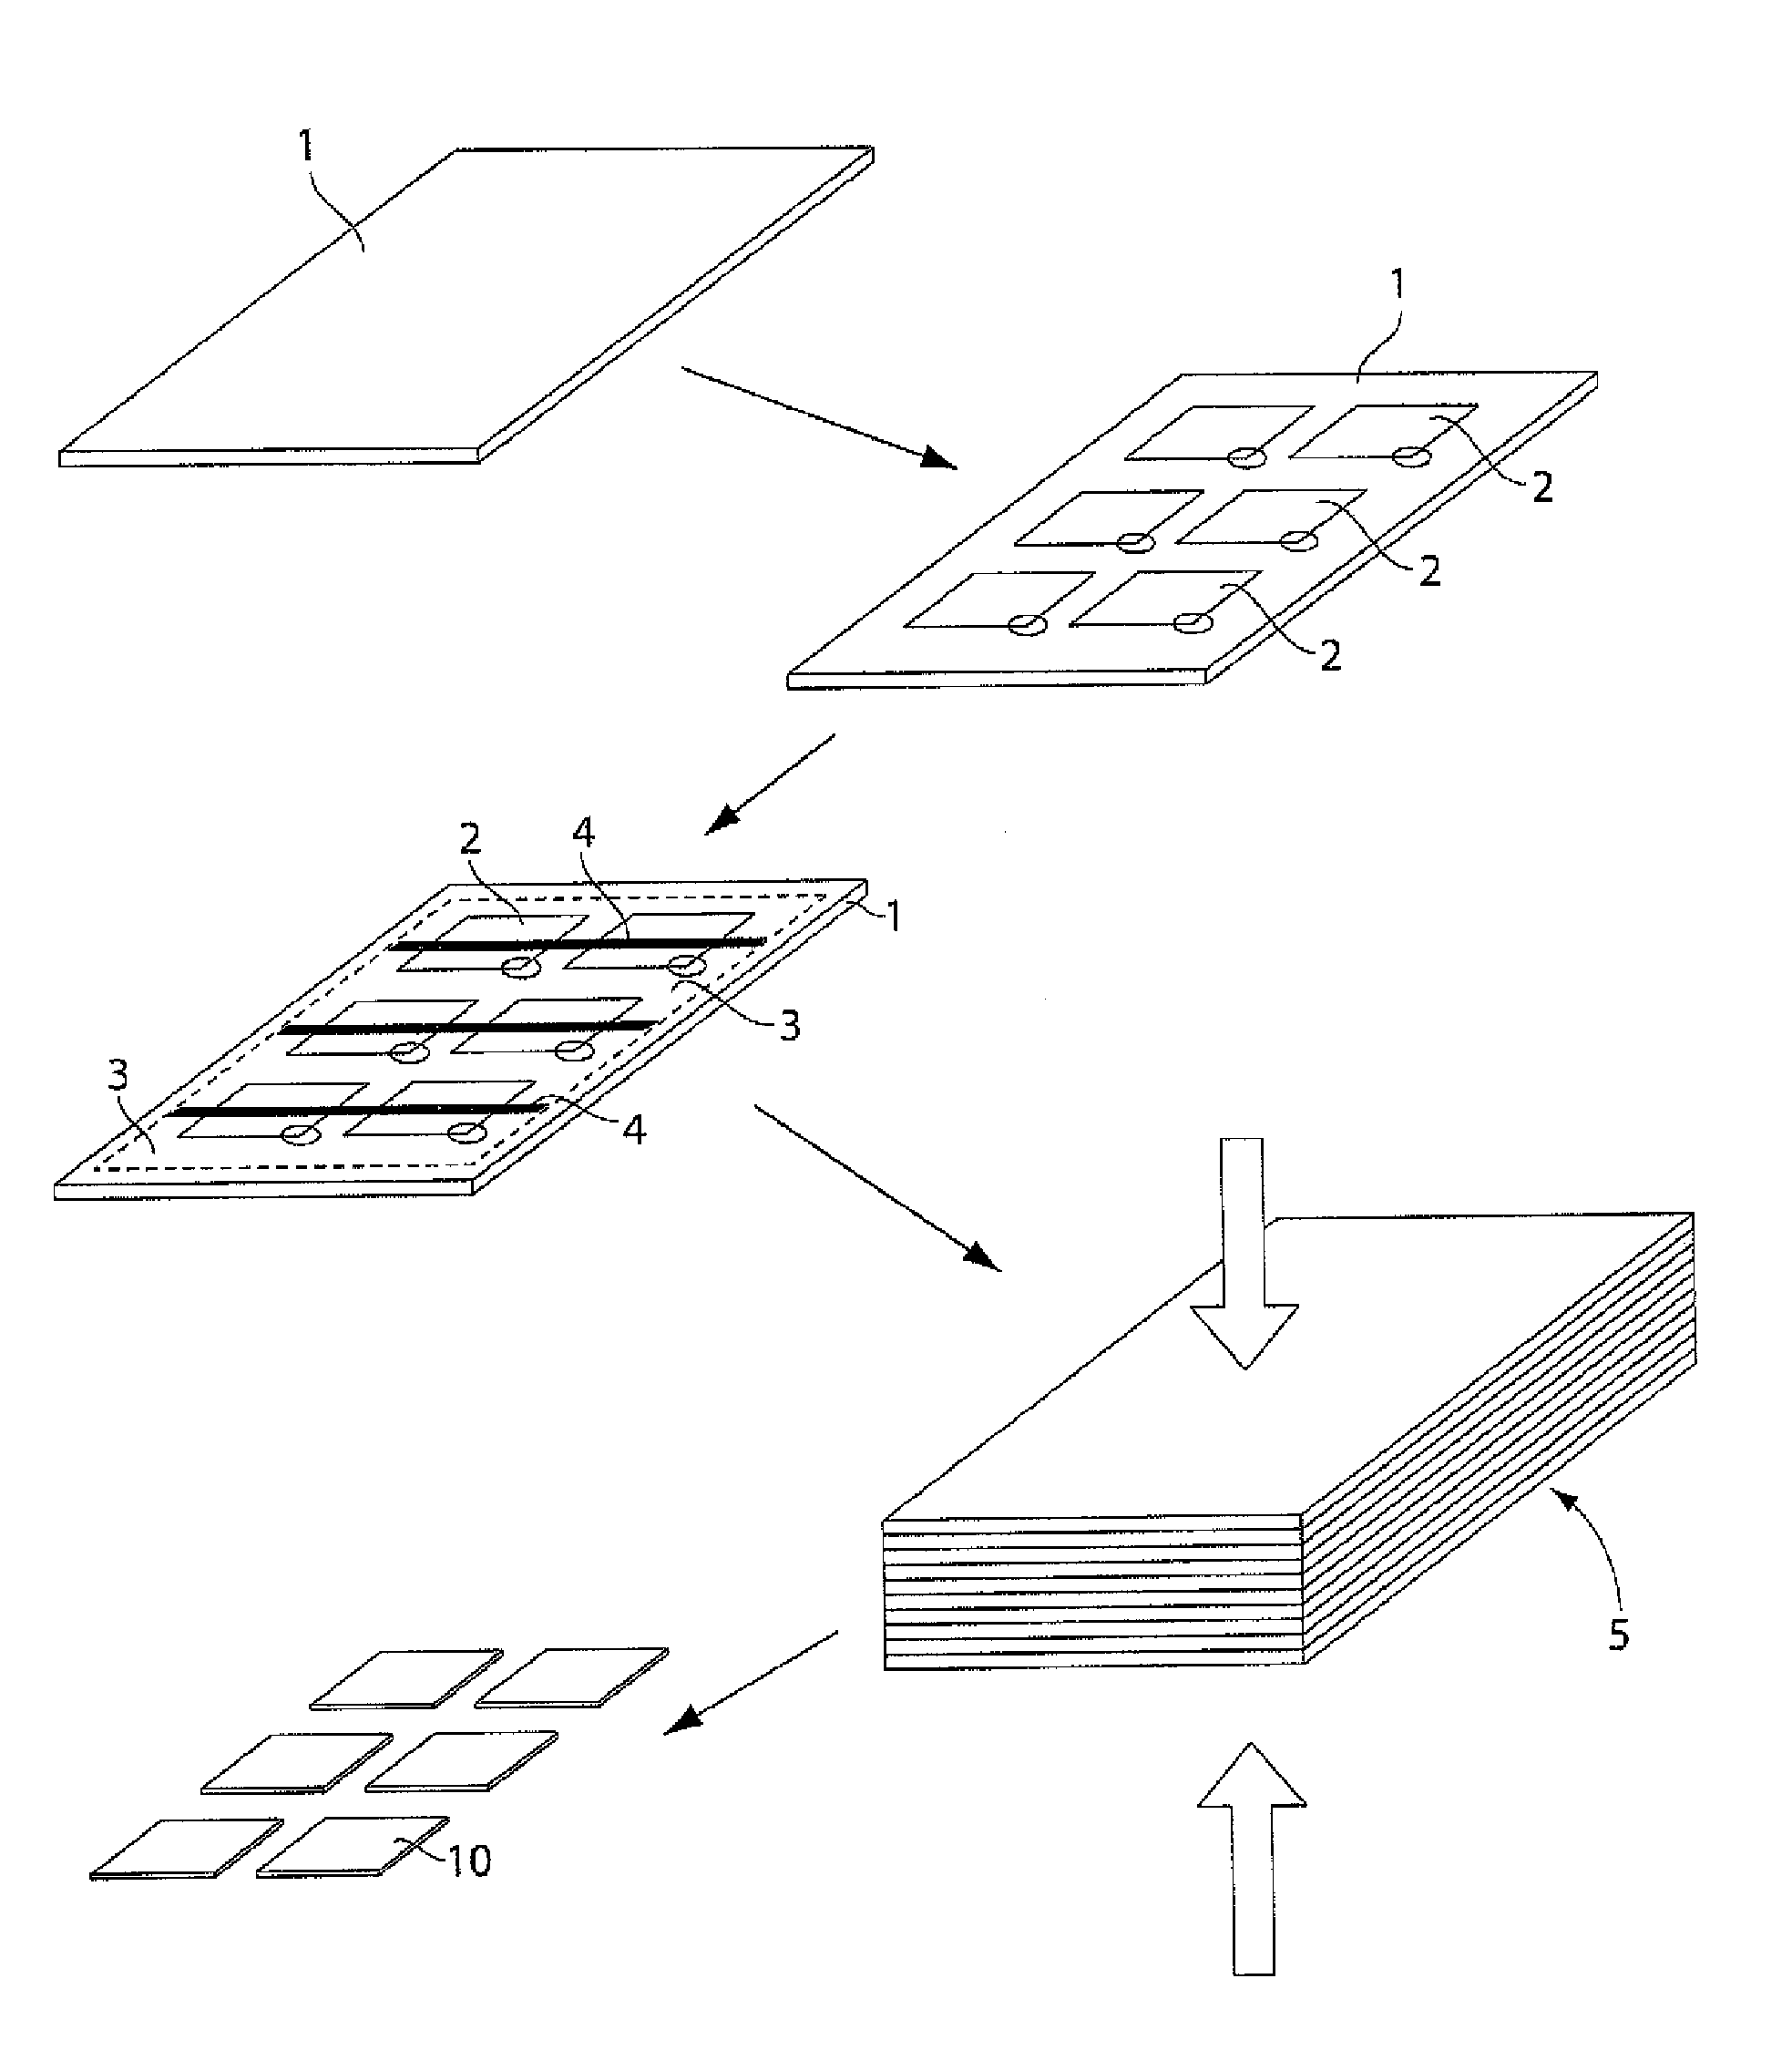 Method and apparatus for forming ISO-compliant transaction cards including PLA